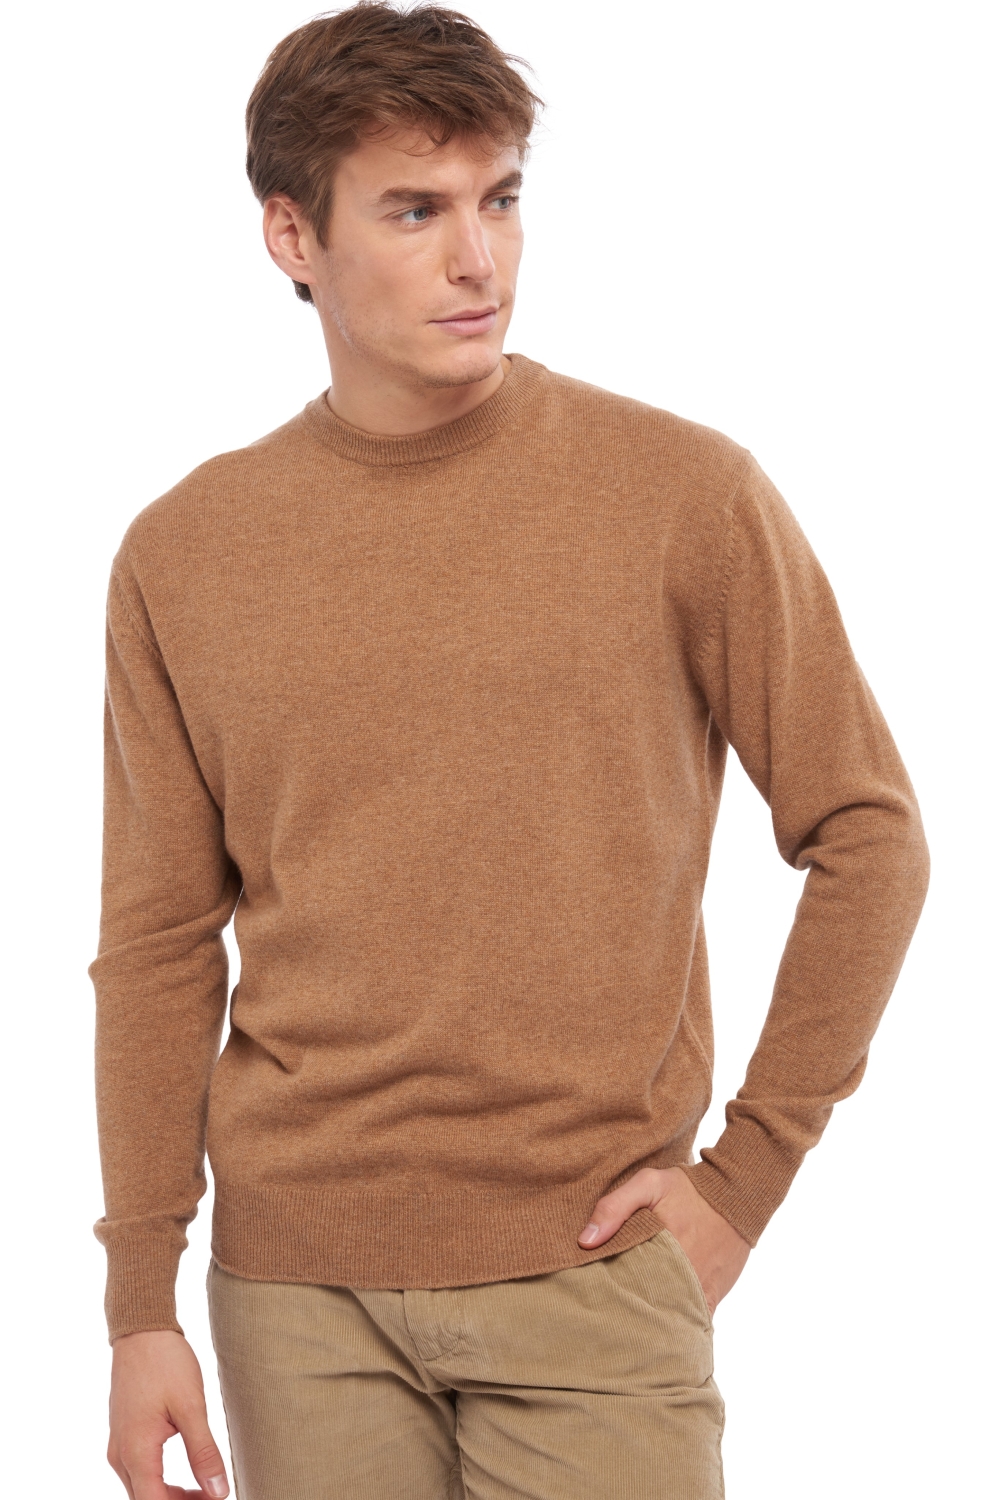 Cachemire pull homme col rond nestor camel chine 4xl